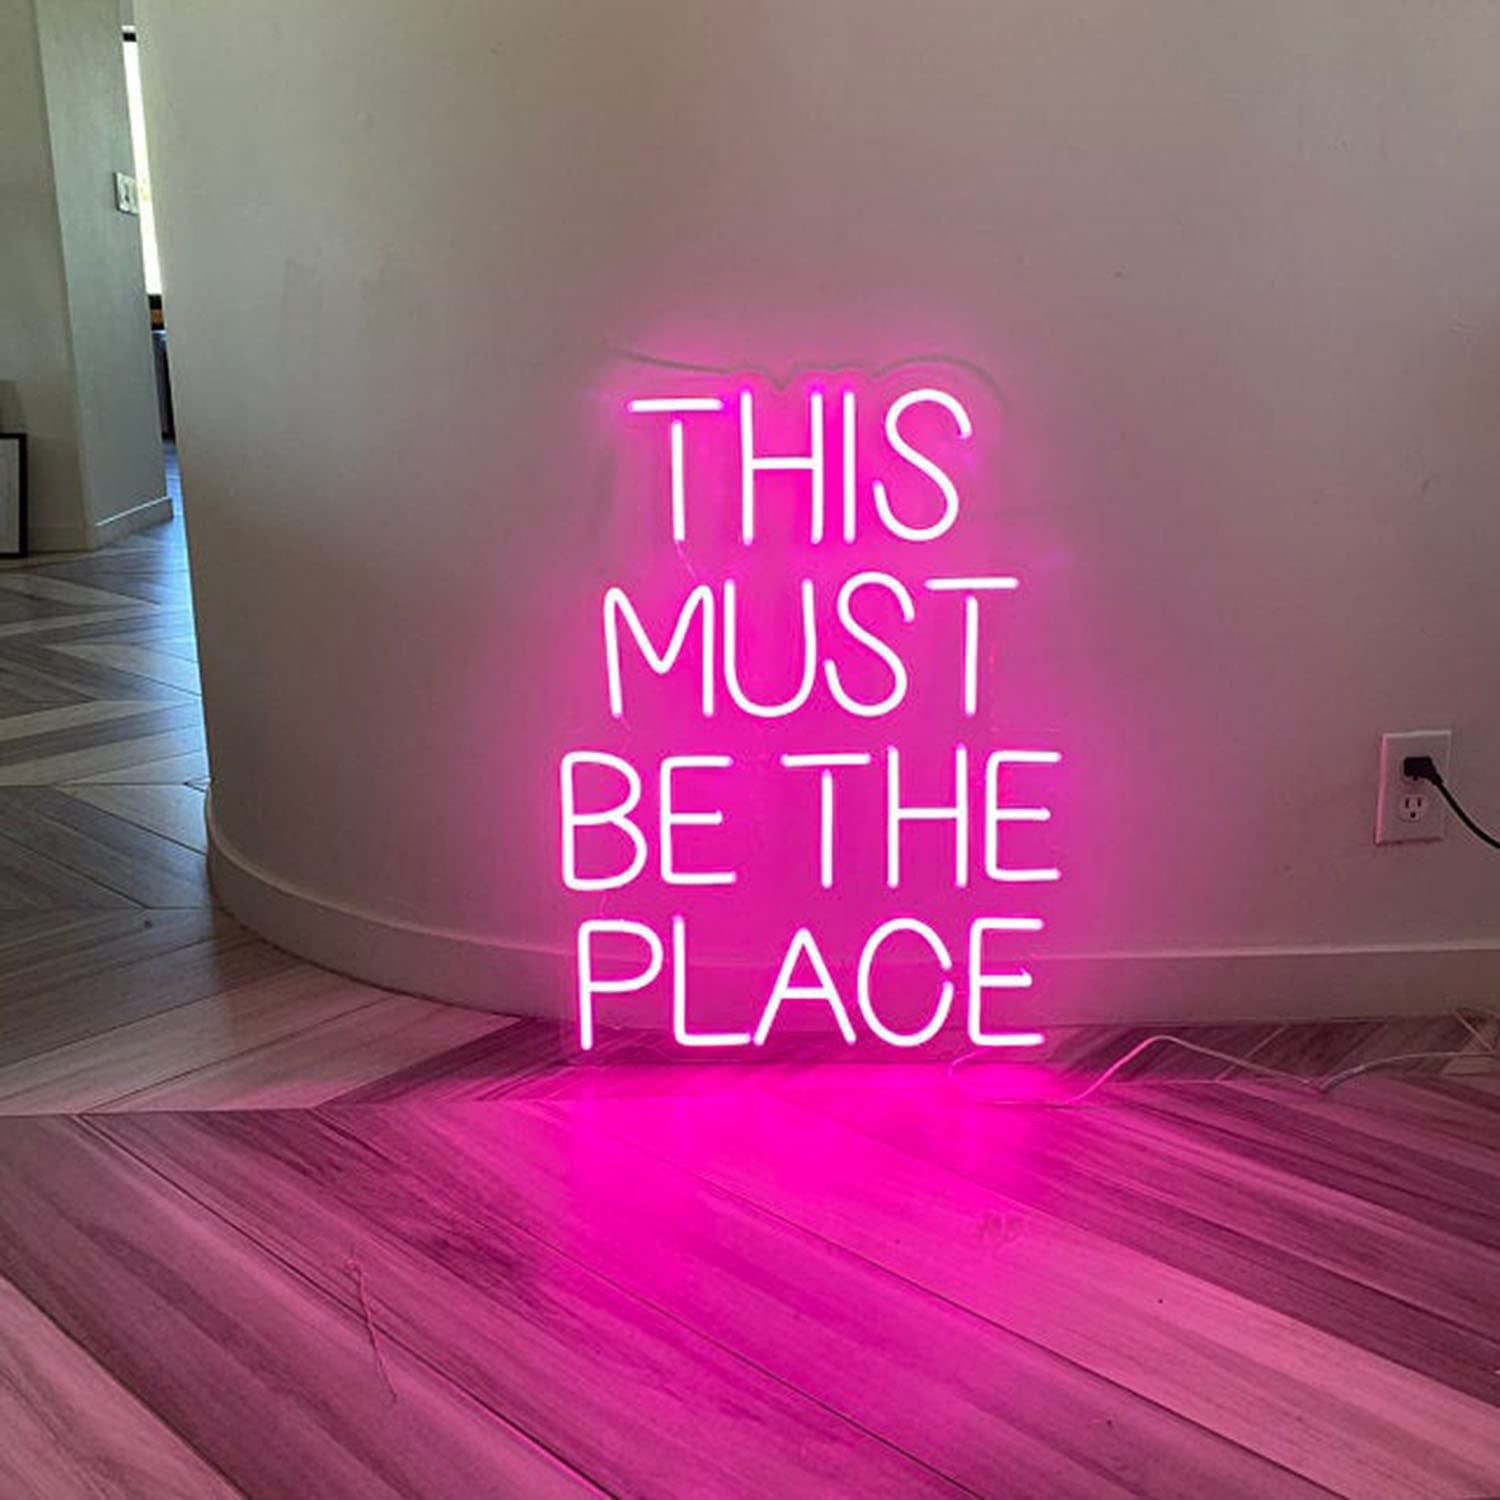 This Must Be the Place Neon Sign Custom Neon Sign Wall Decorations Wedding Neon Sign for Weddings Anniversaries Party Flex Led Neon Light Sign Wedding Decor (Pink)